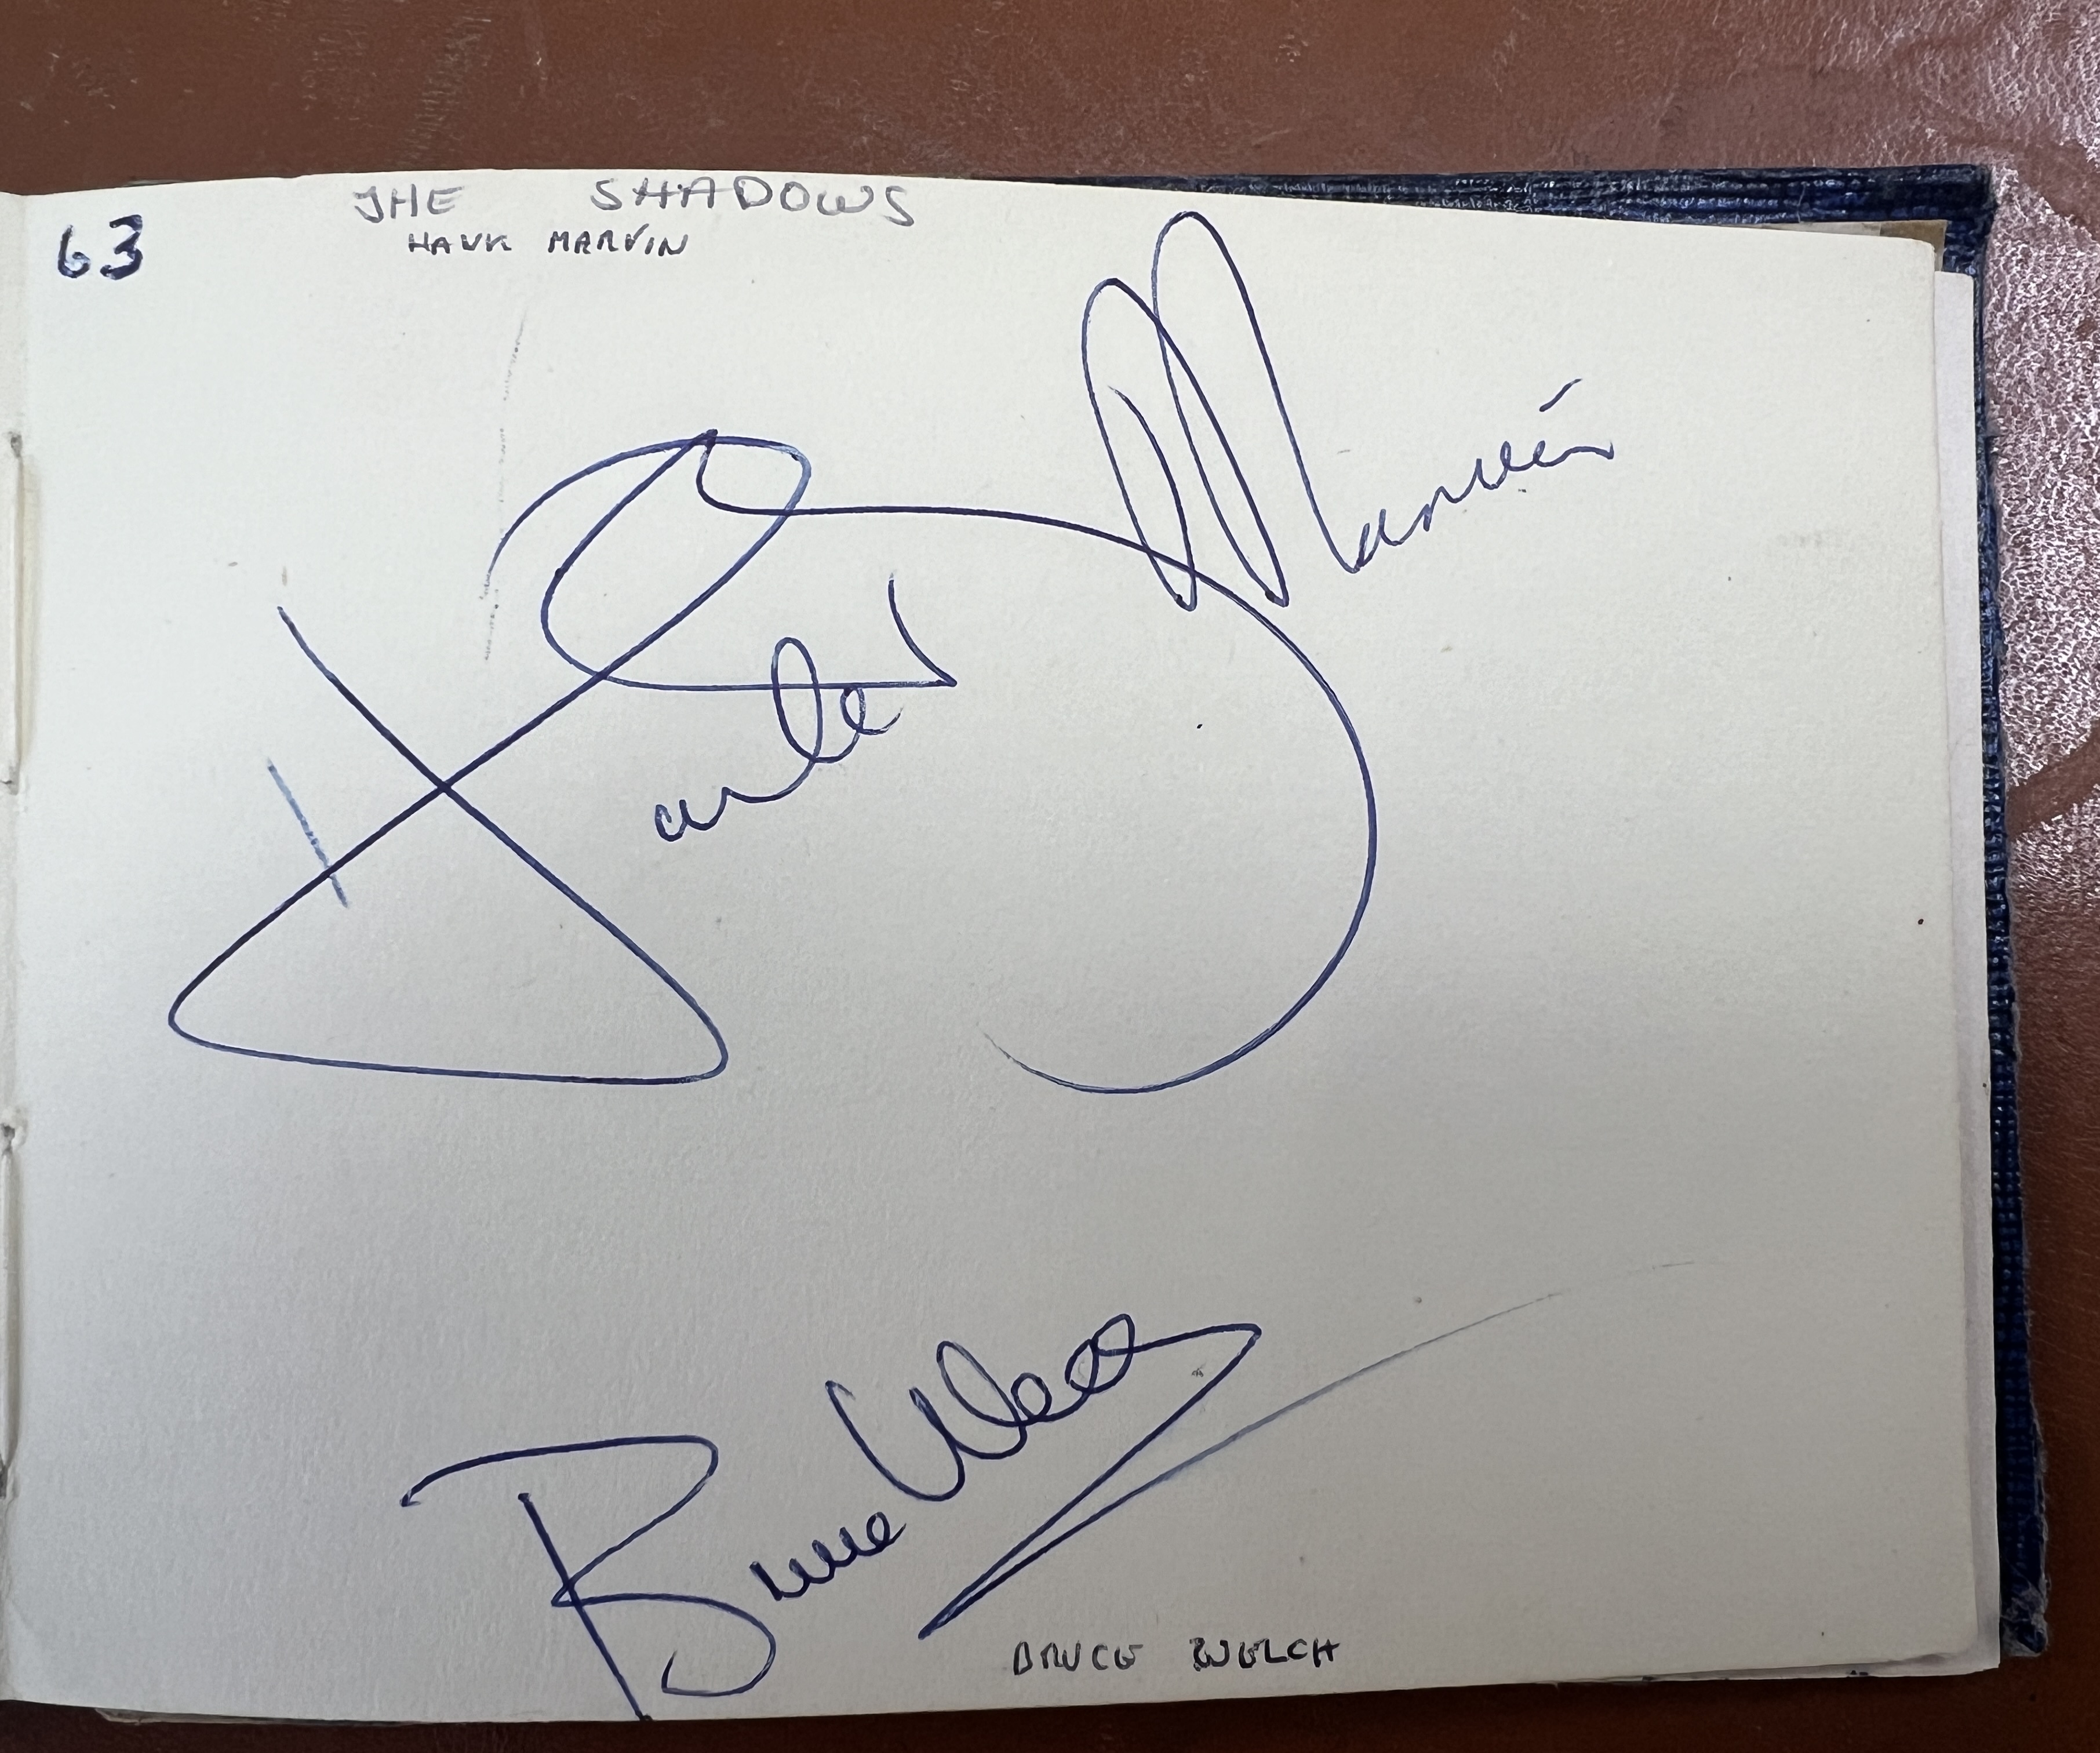 A 1960's autograph album containing autographs of various celebrities including Cliff Richard, - Image 34 of 37